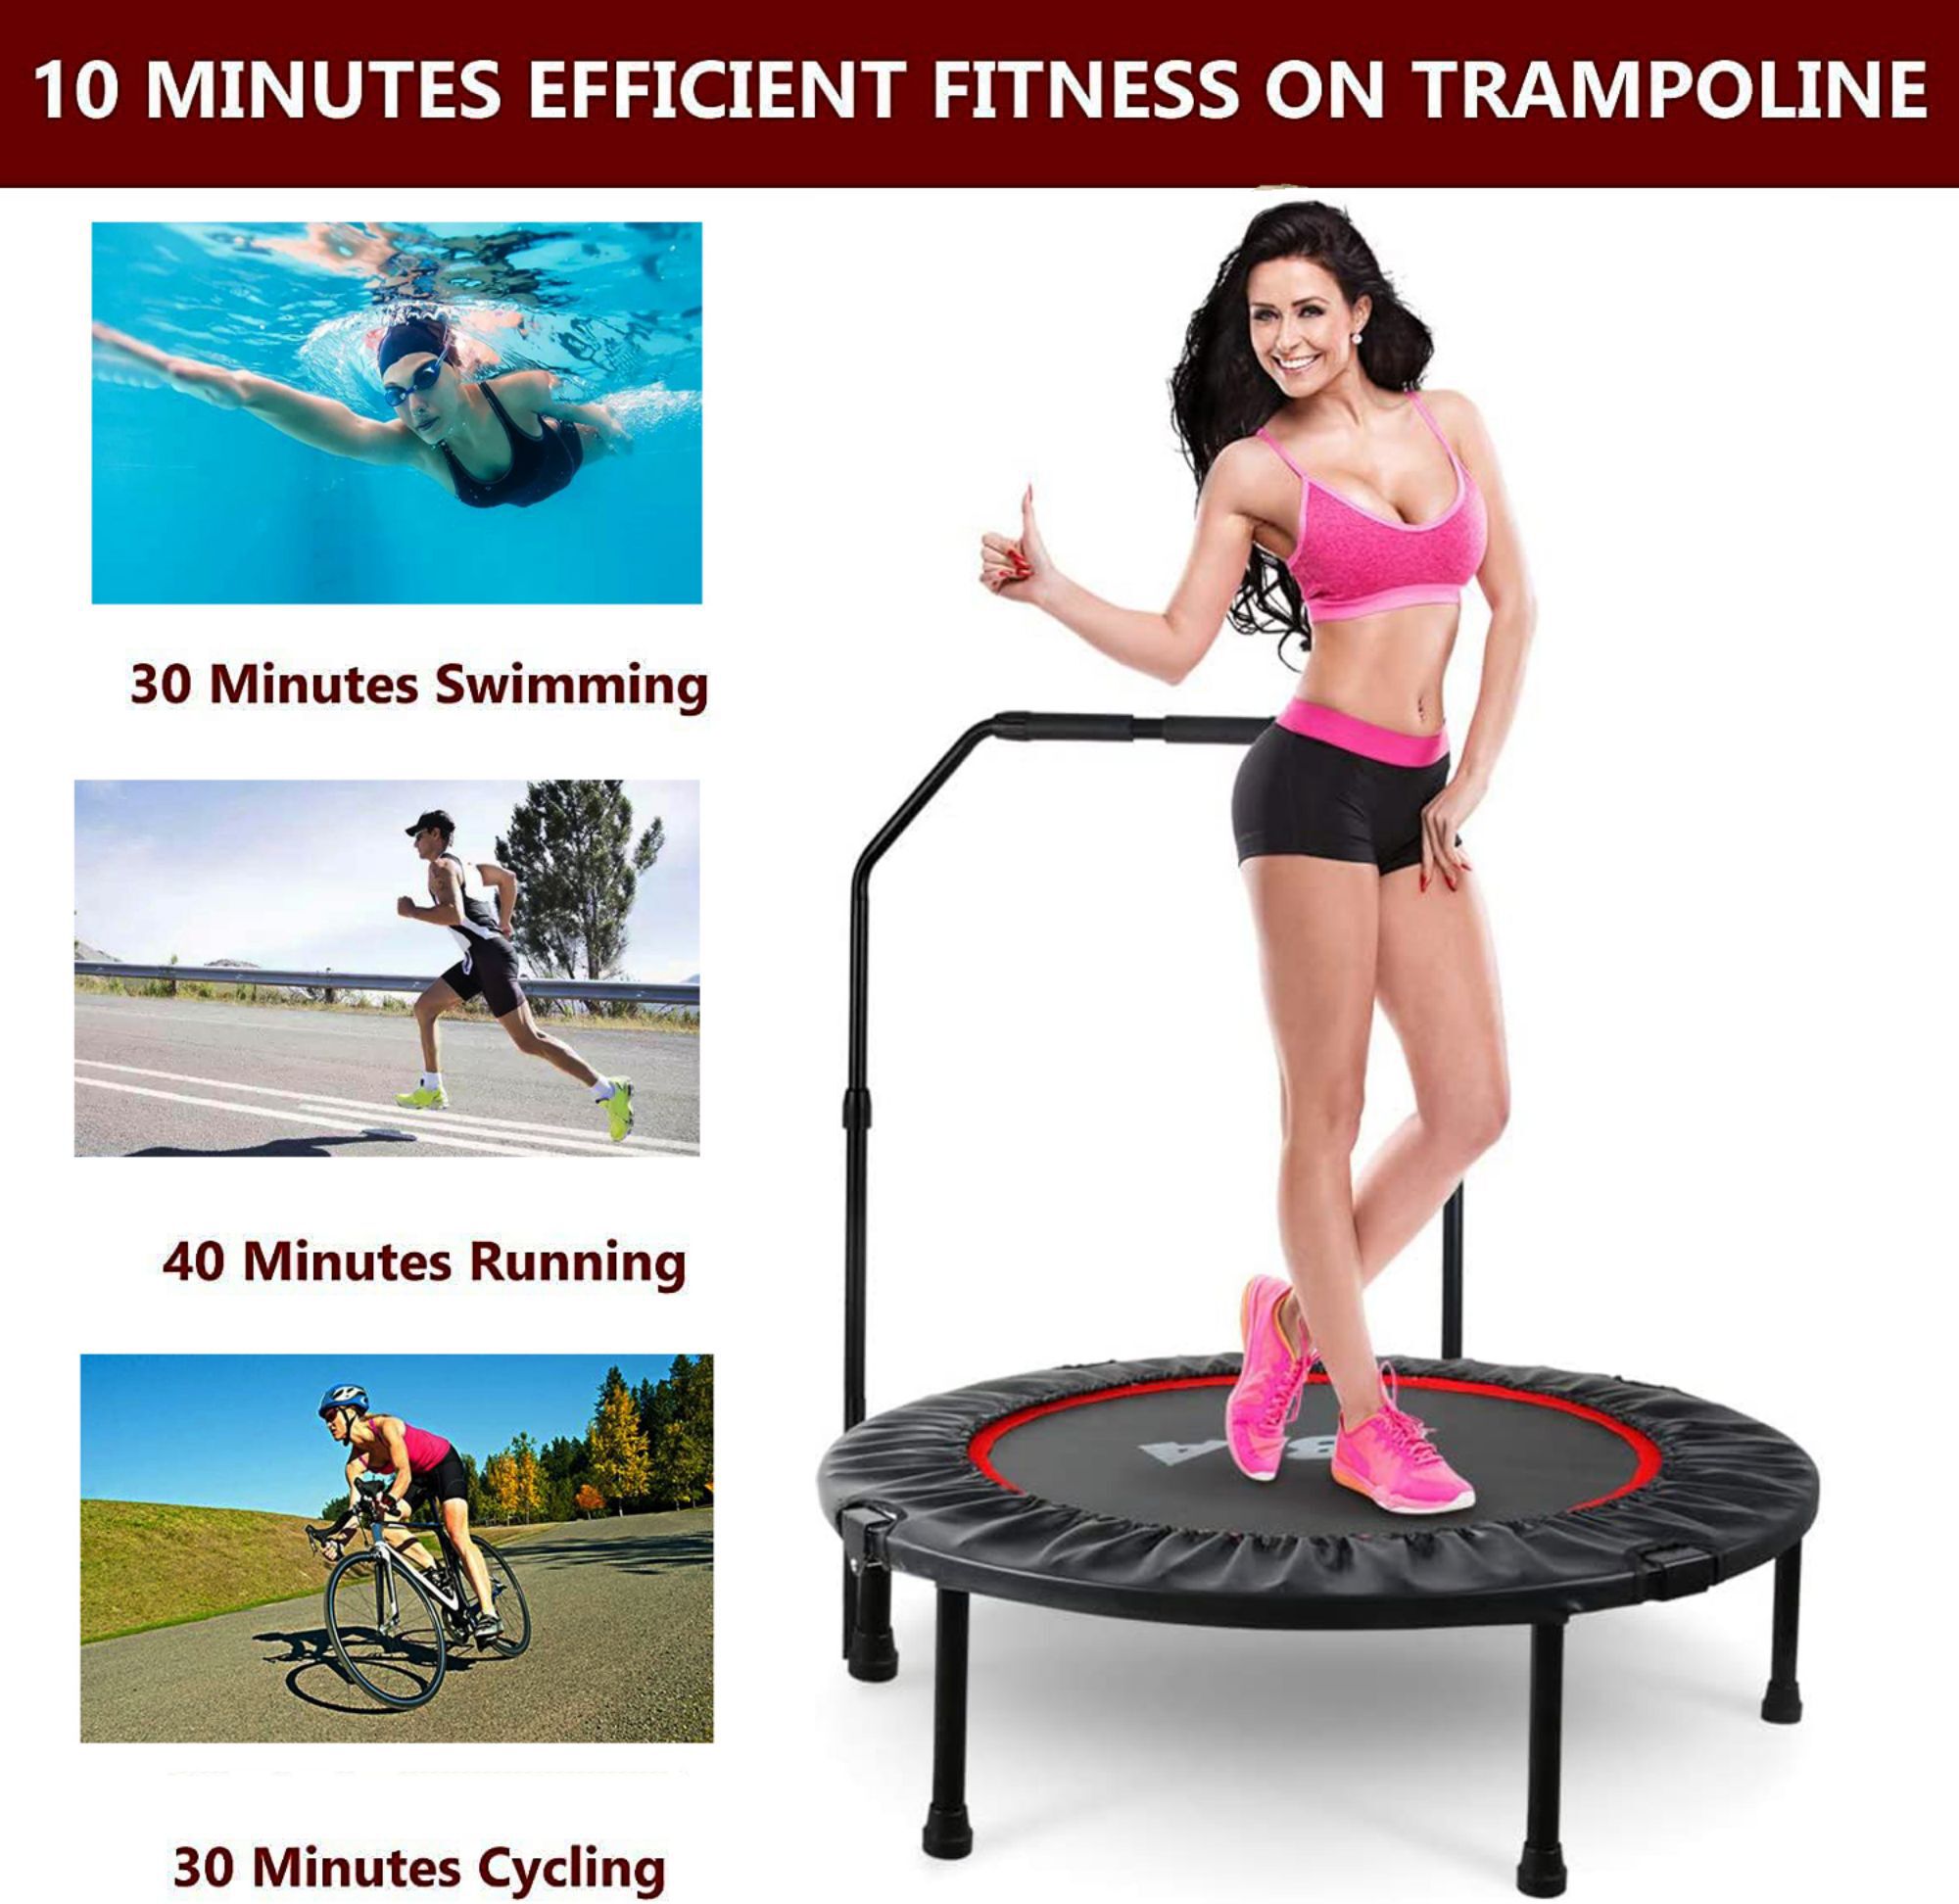 Trampolines at